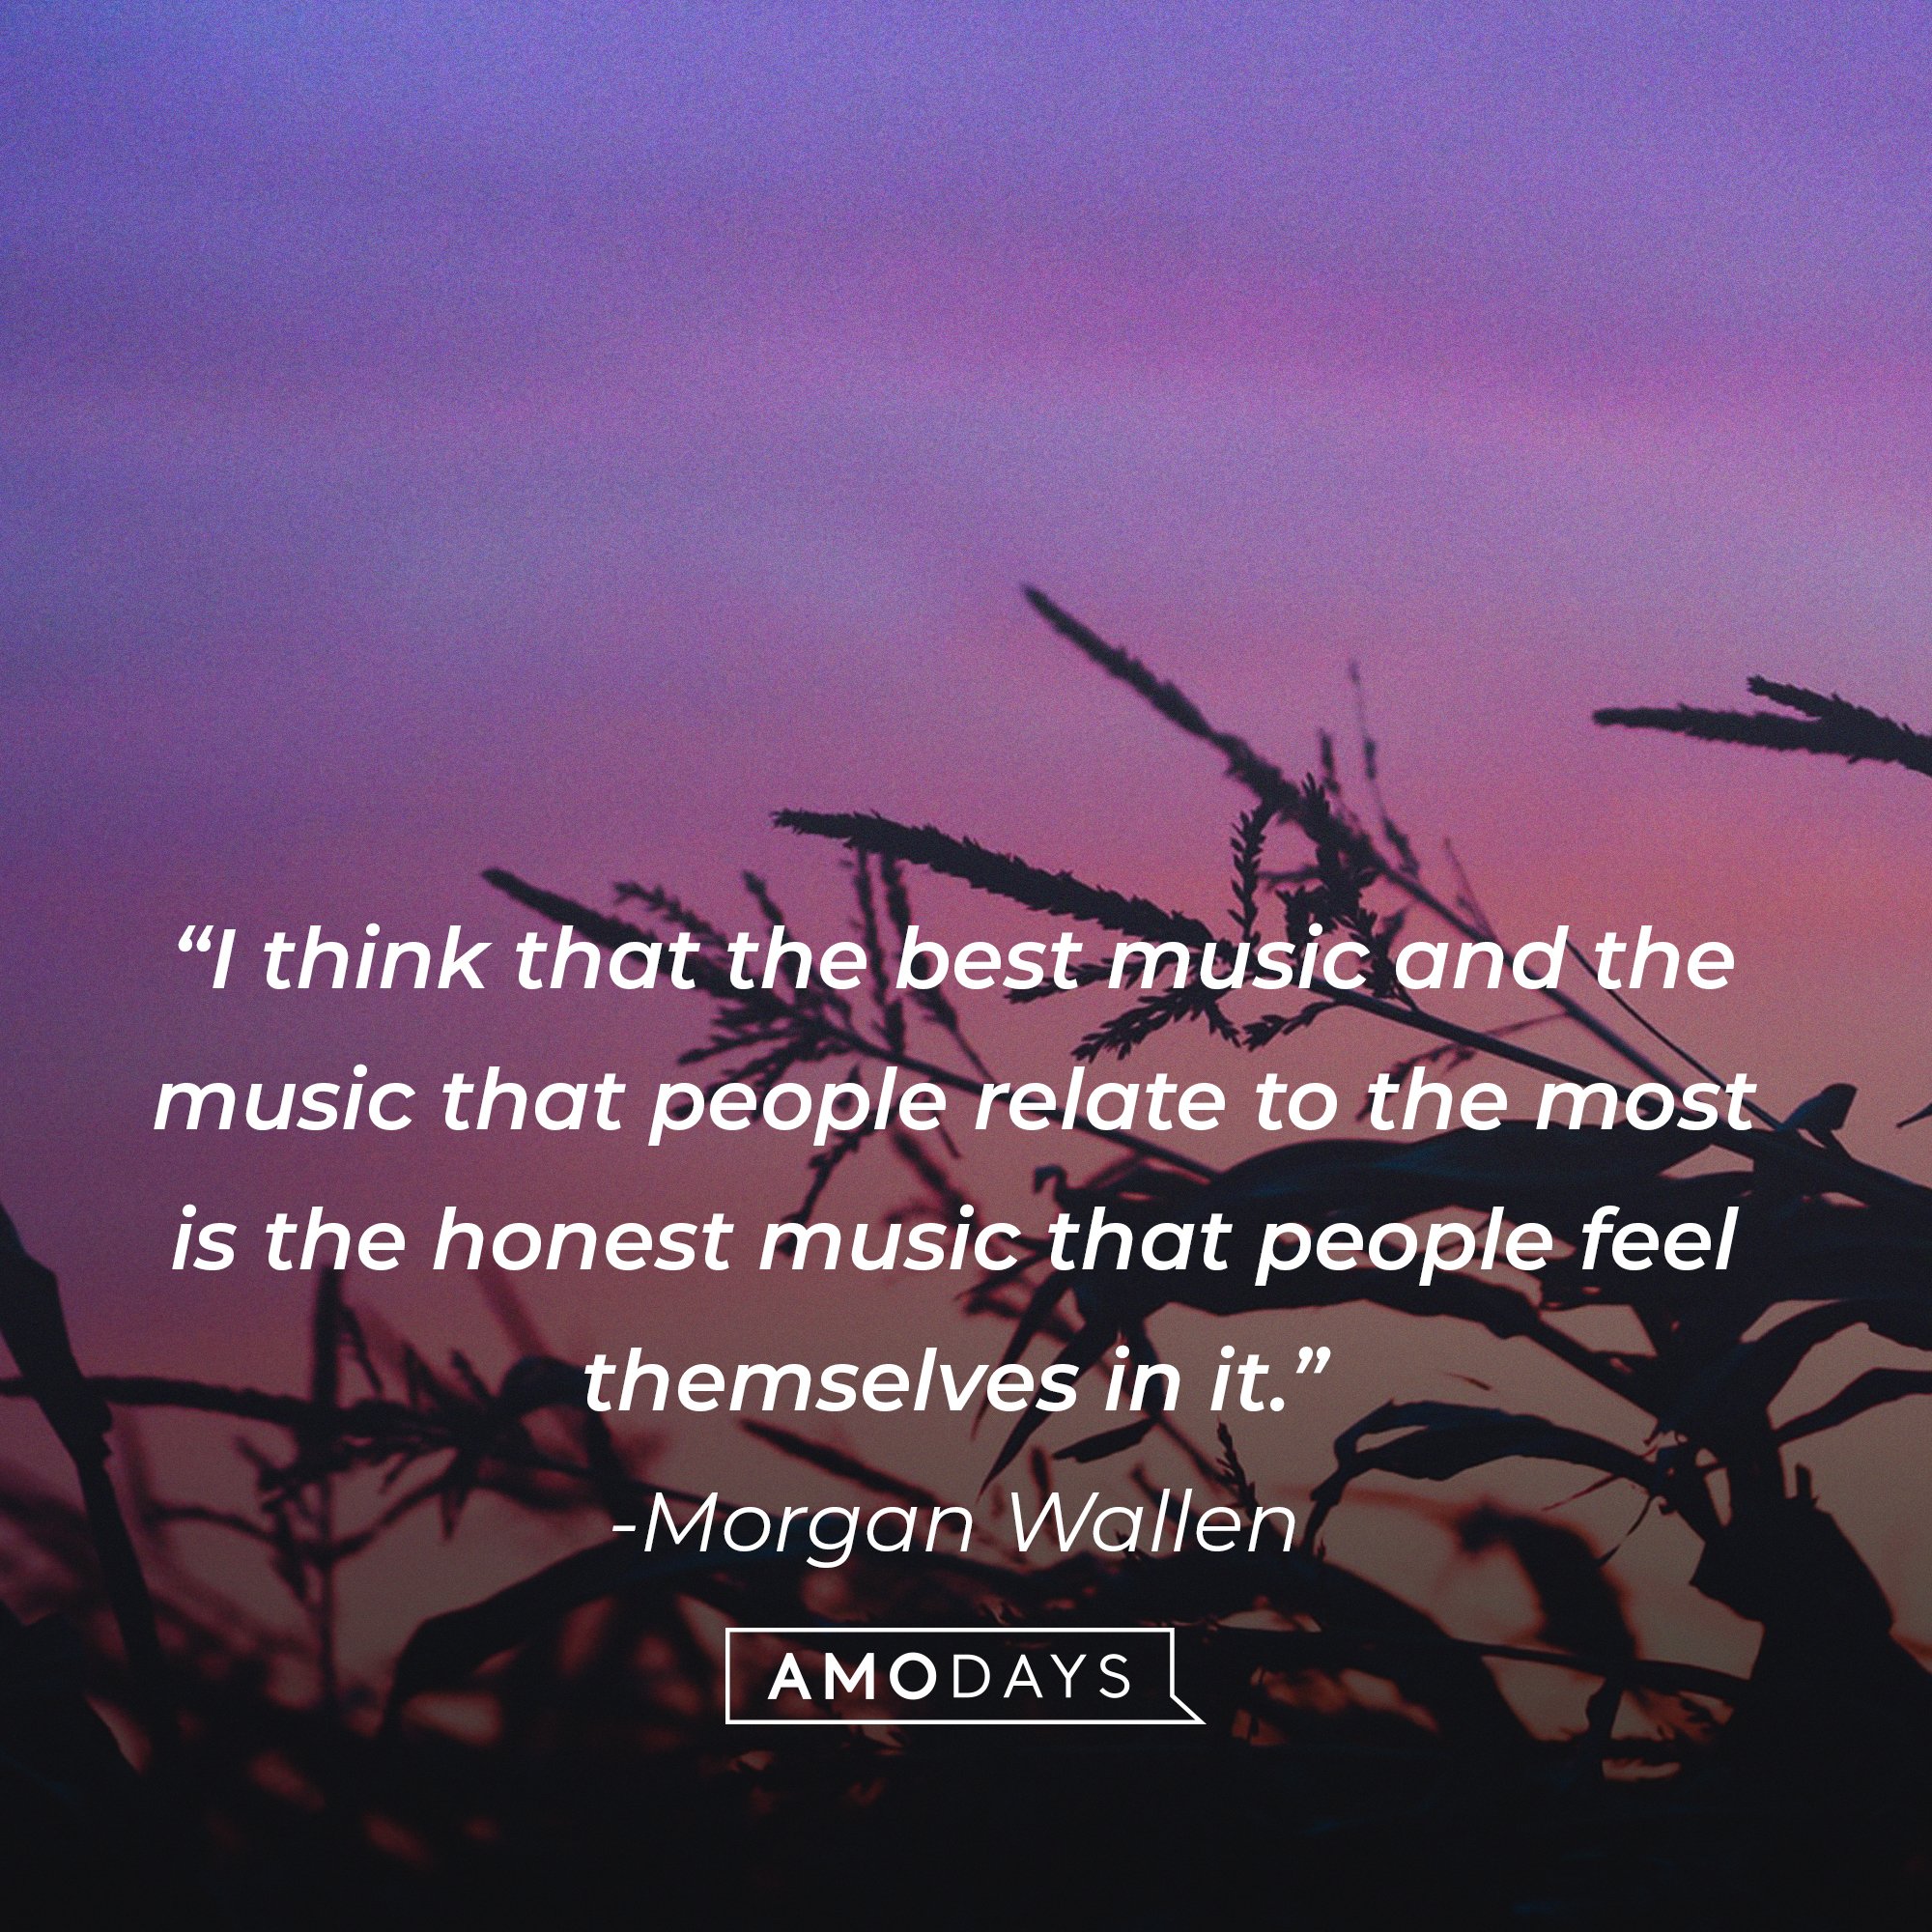  Morgan Wallen’s quote: “I think that the best music and the music that people relate to the most is the honest music that people feel themselves in it.”  Image: AmoDays